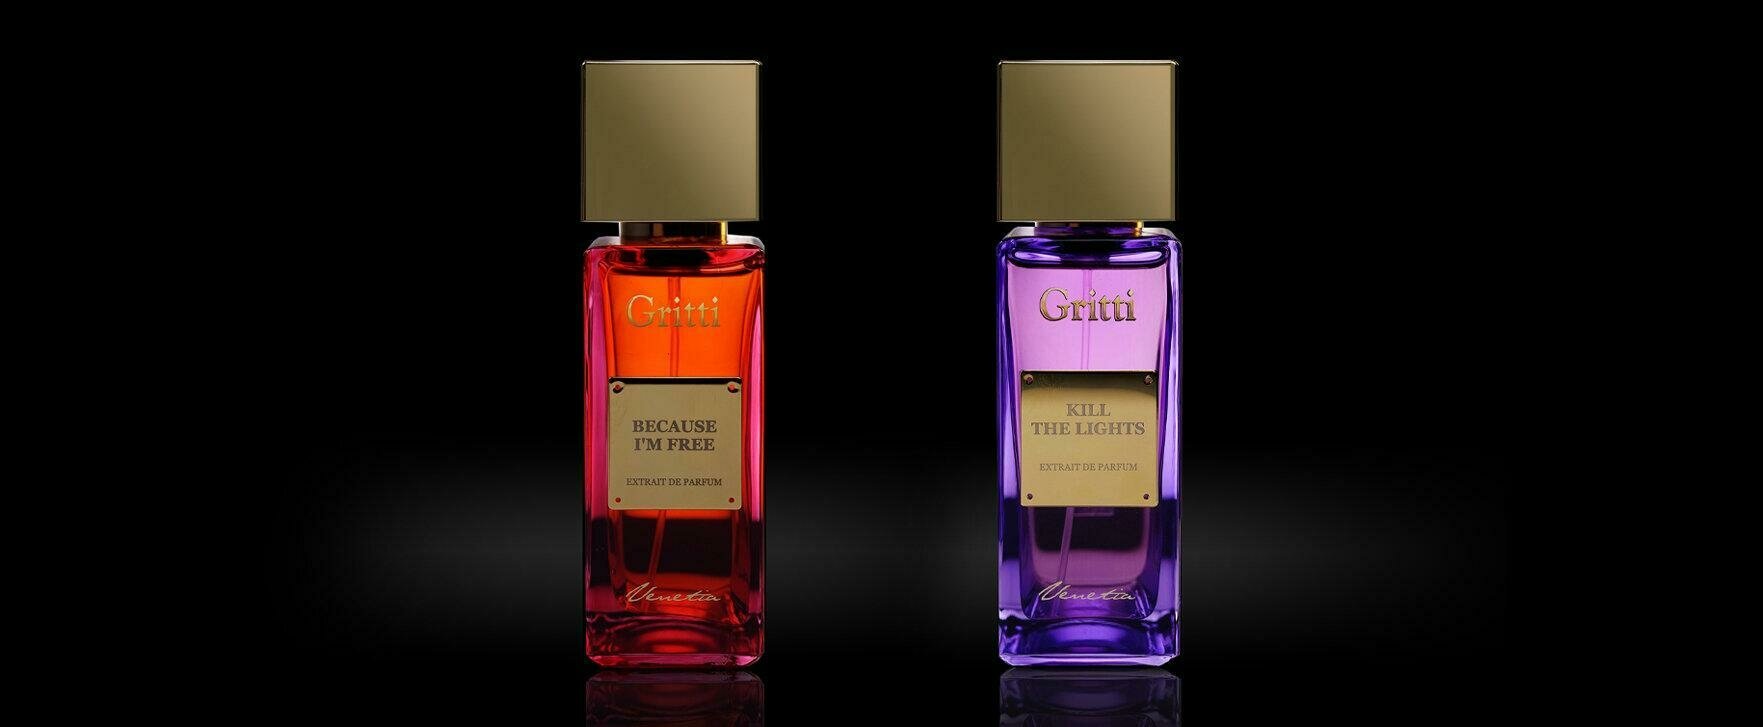 “Because I’m Free’ & “Kill the Lights” - Gritti Launches New Unisex Fragrances